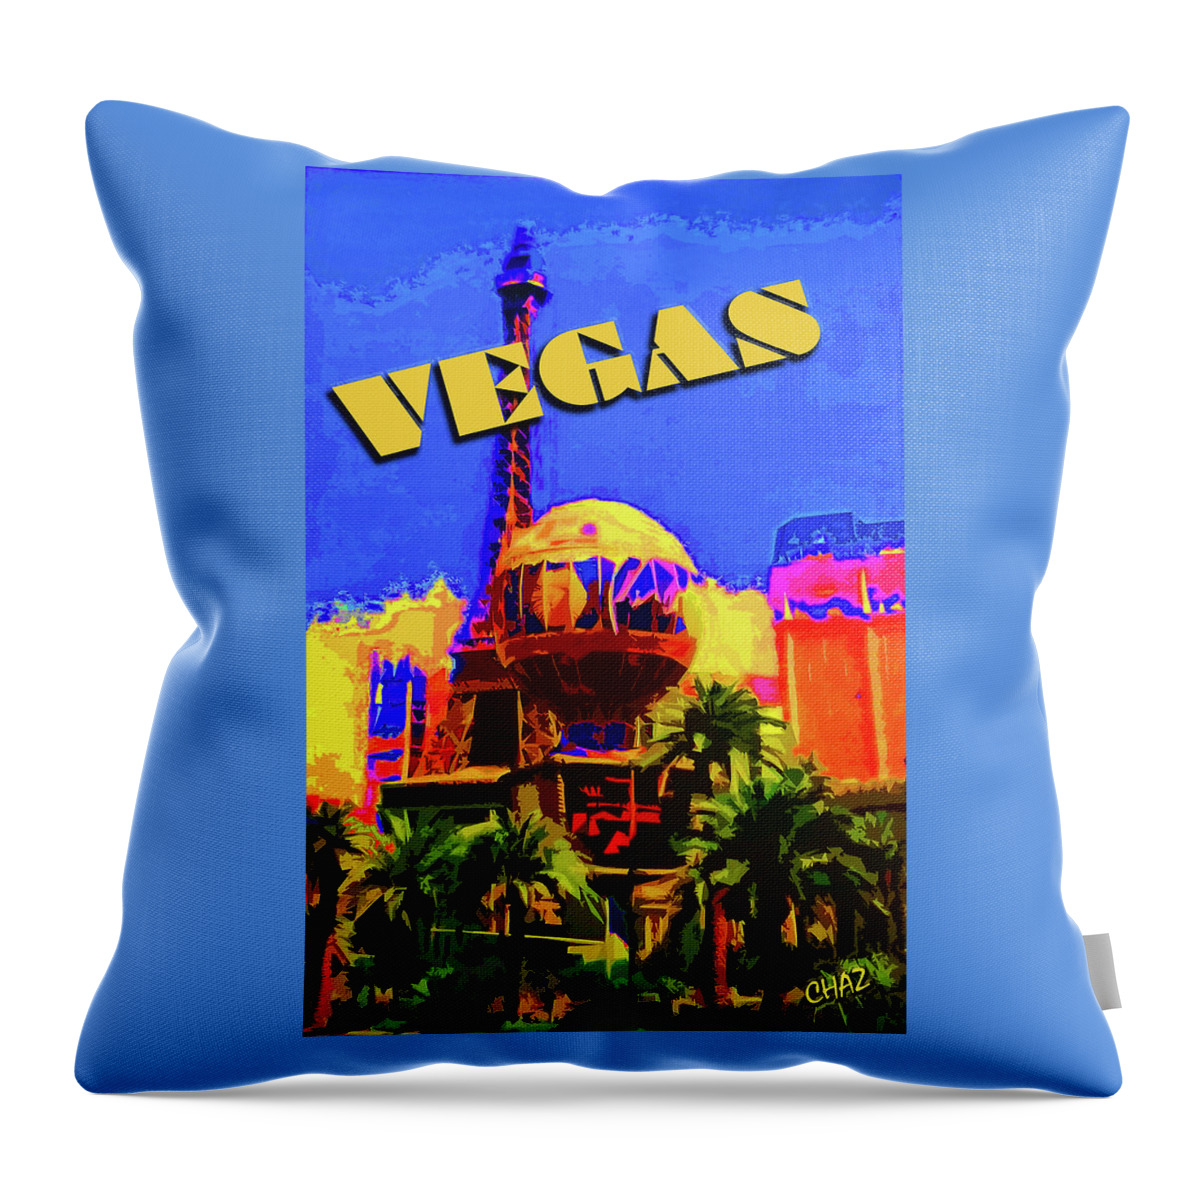 Las Vegas Throw Pillow featuring the painting Vegas by CHAZ Daugherty